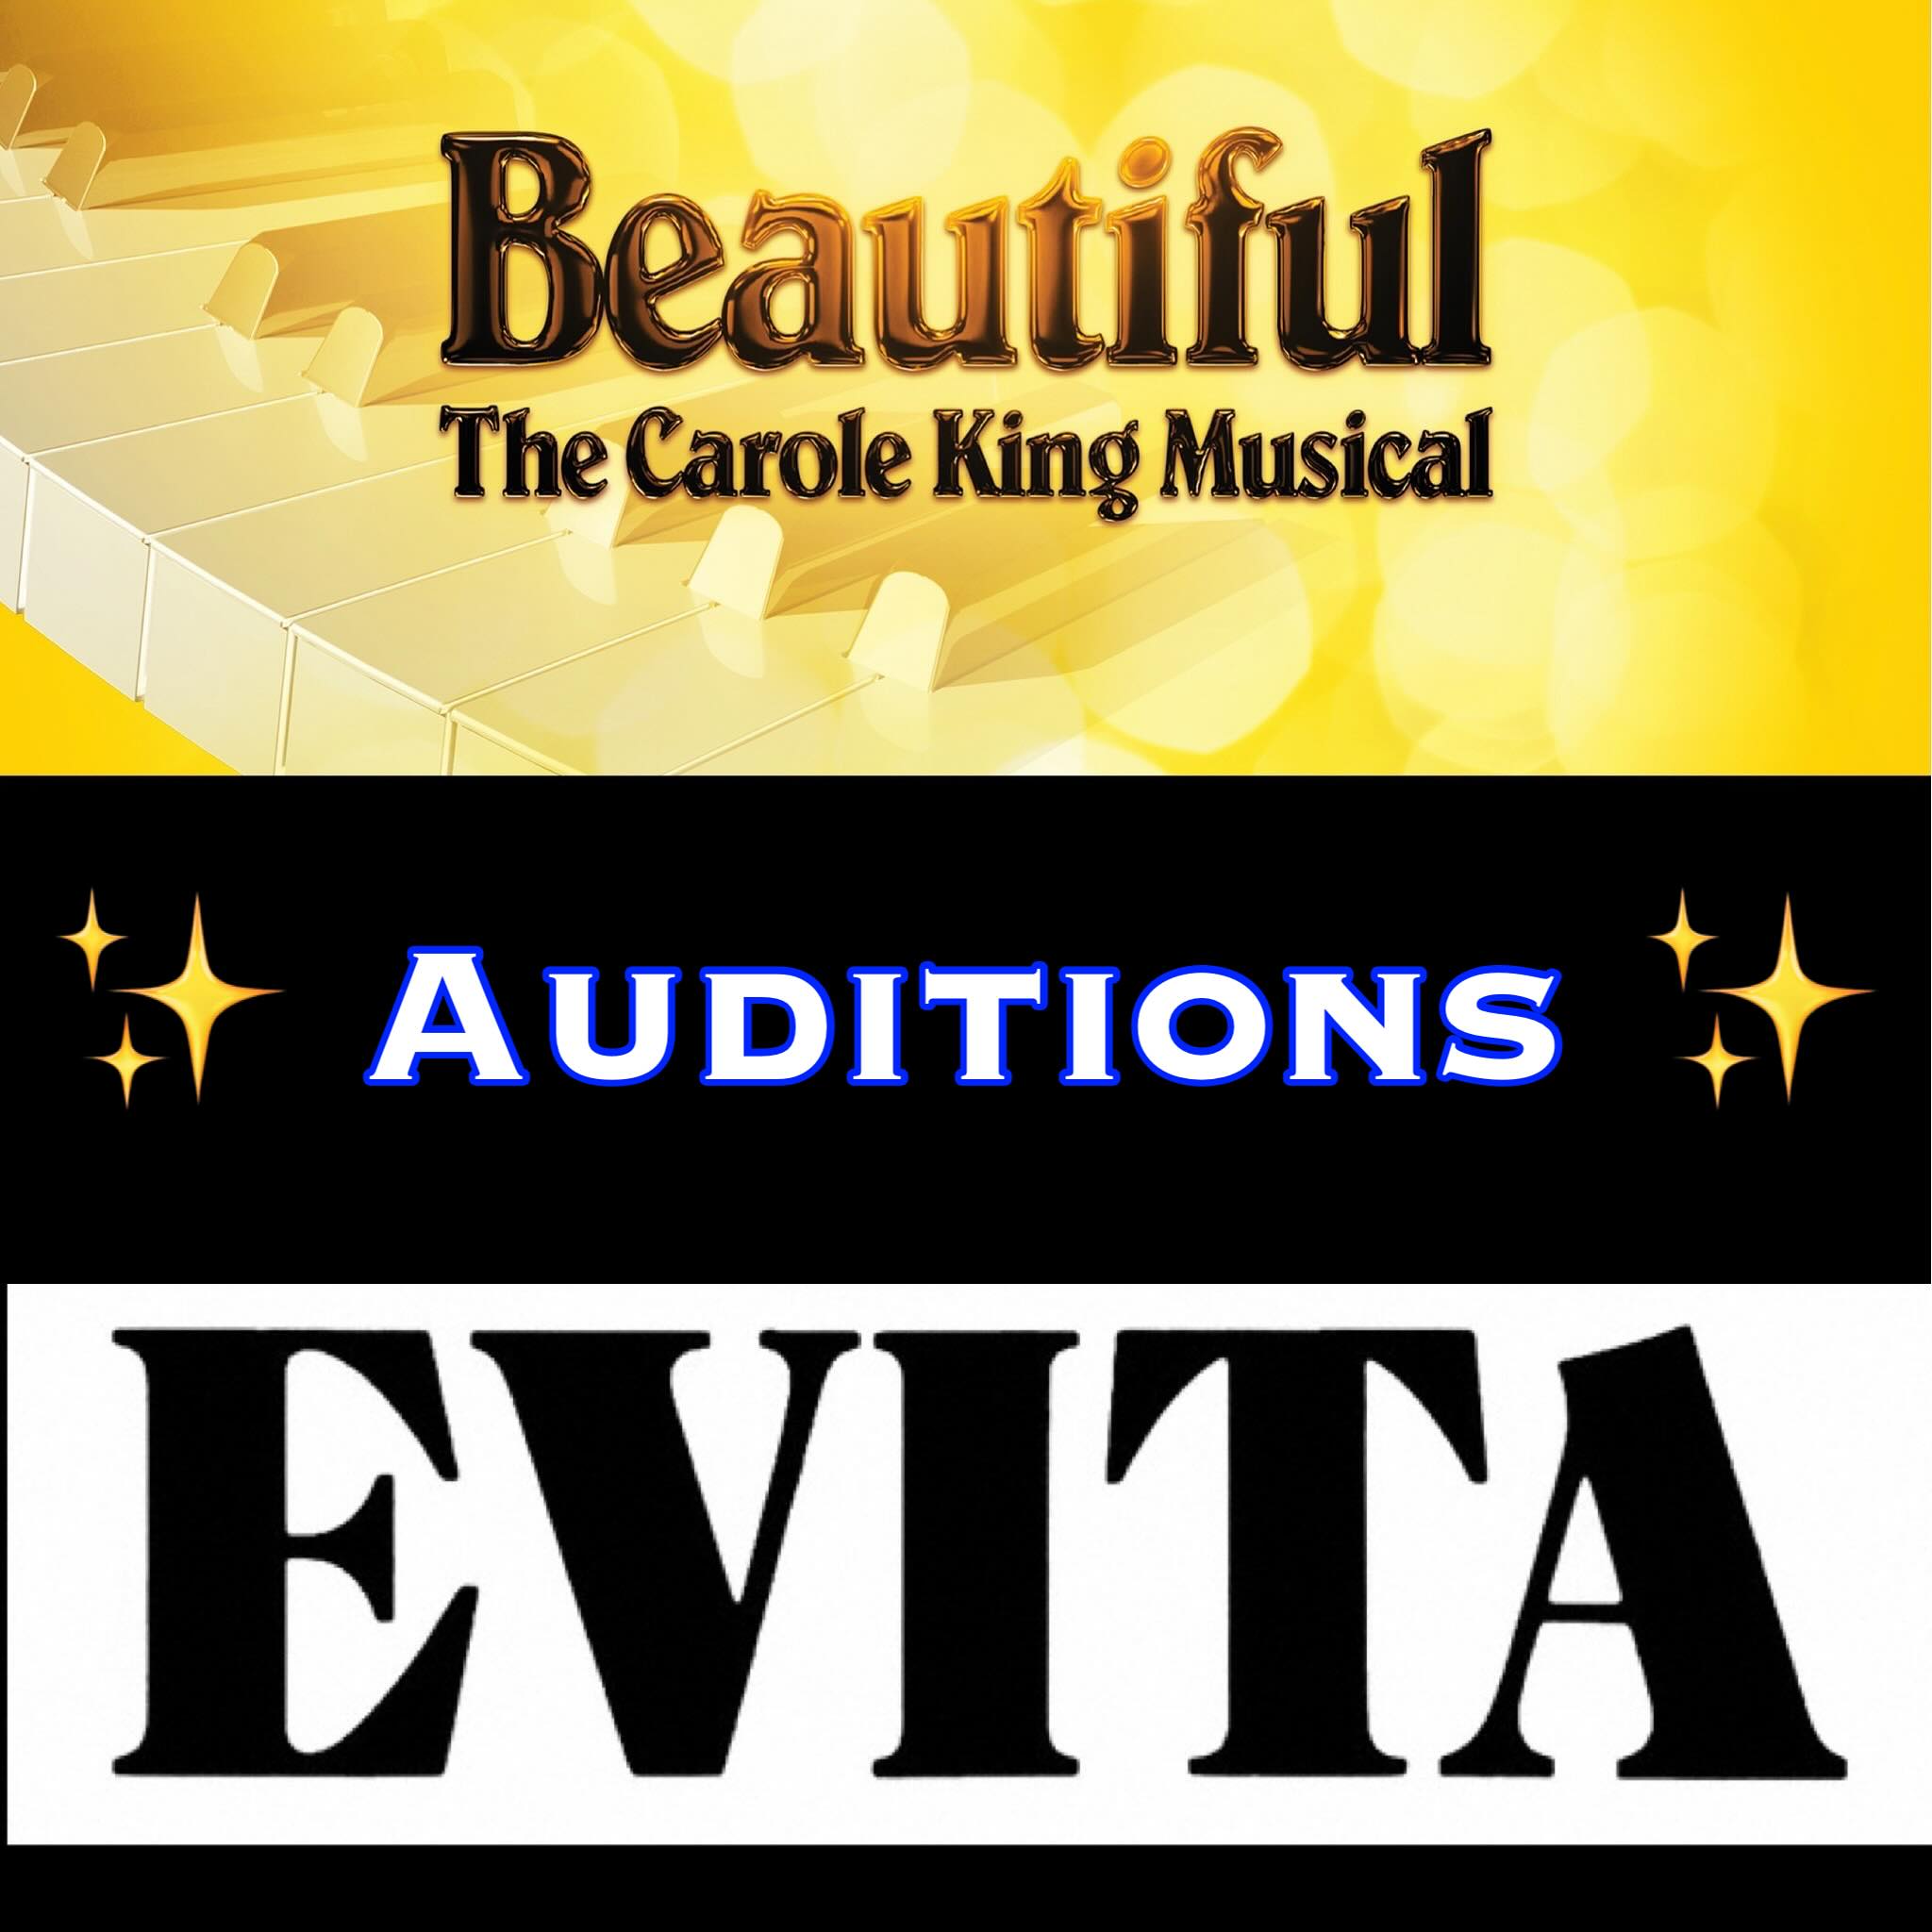 CTX3672. In-person and Video Auditions for BEAUTIFUL and EVITA, by The Harlequin, San Antonio